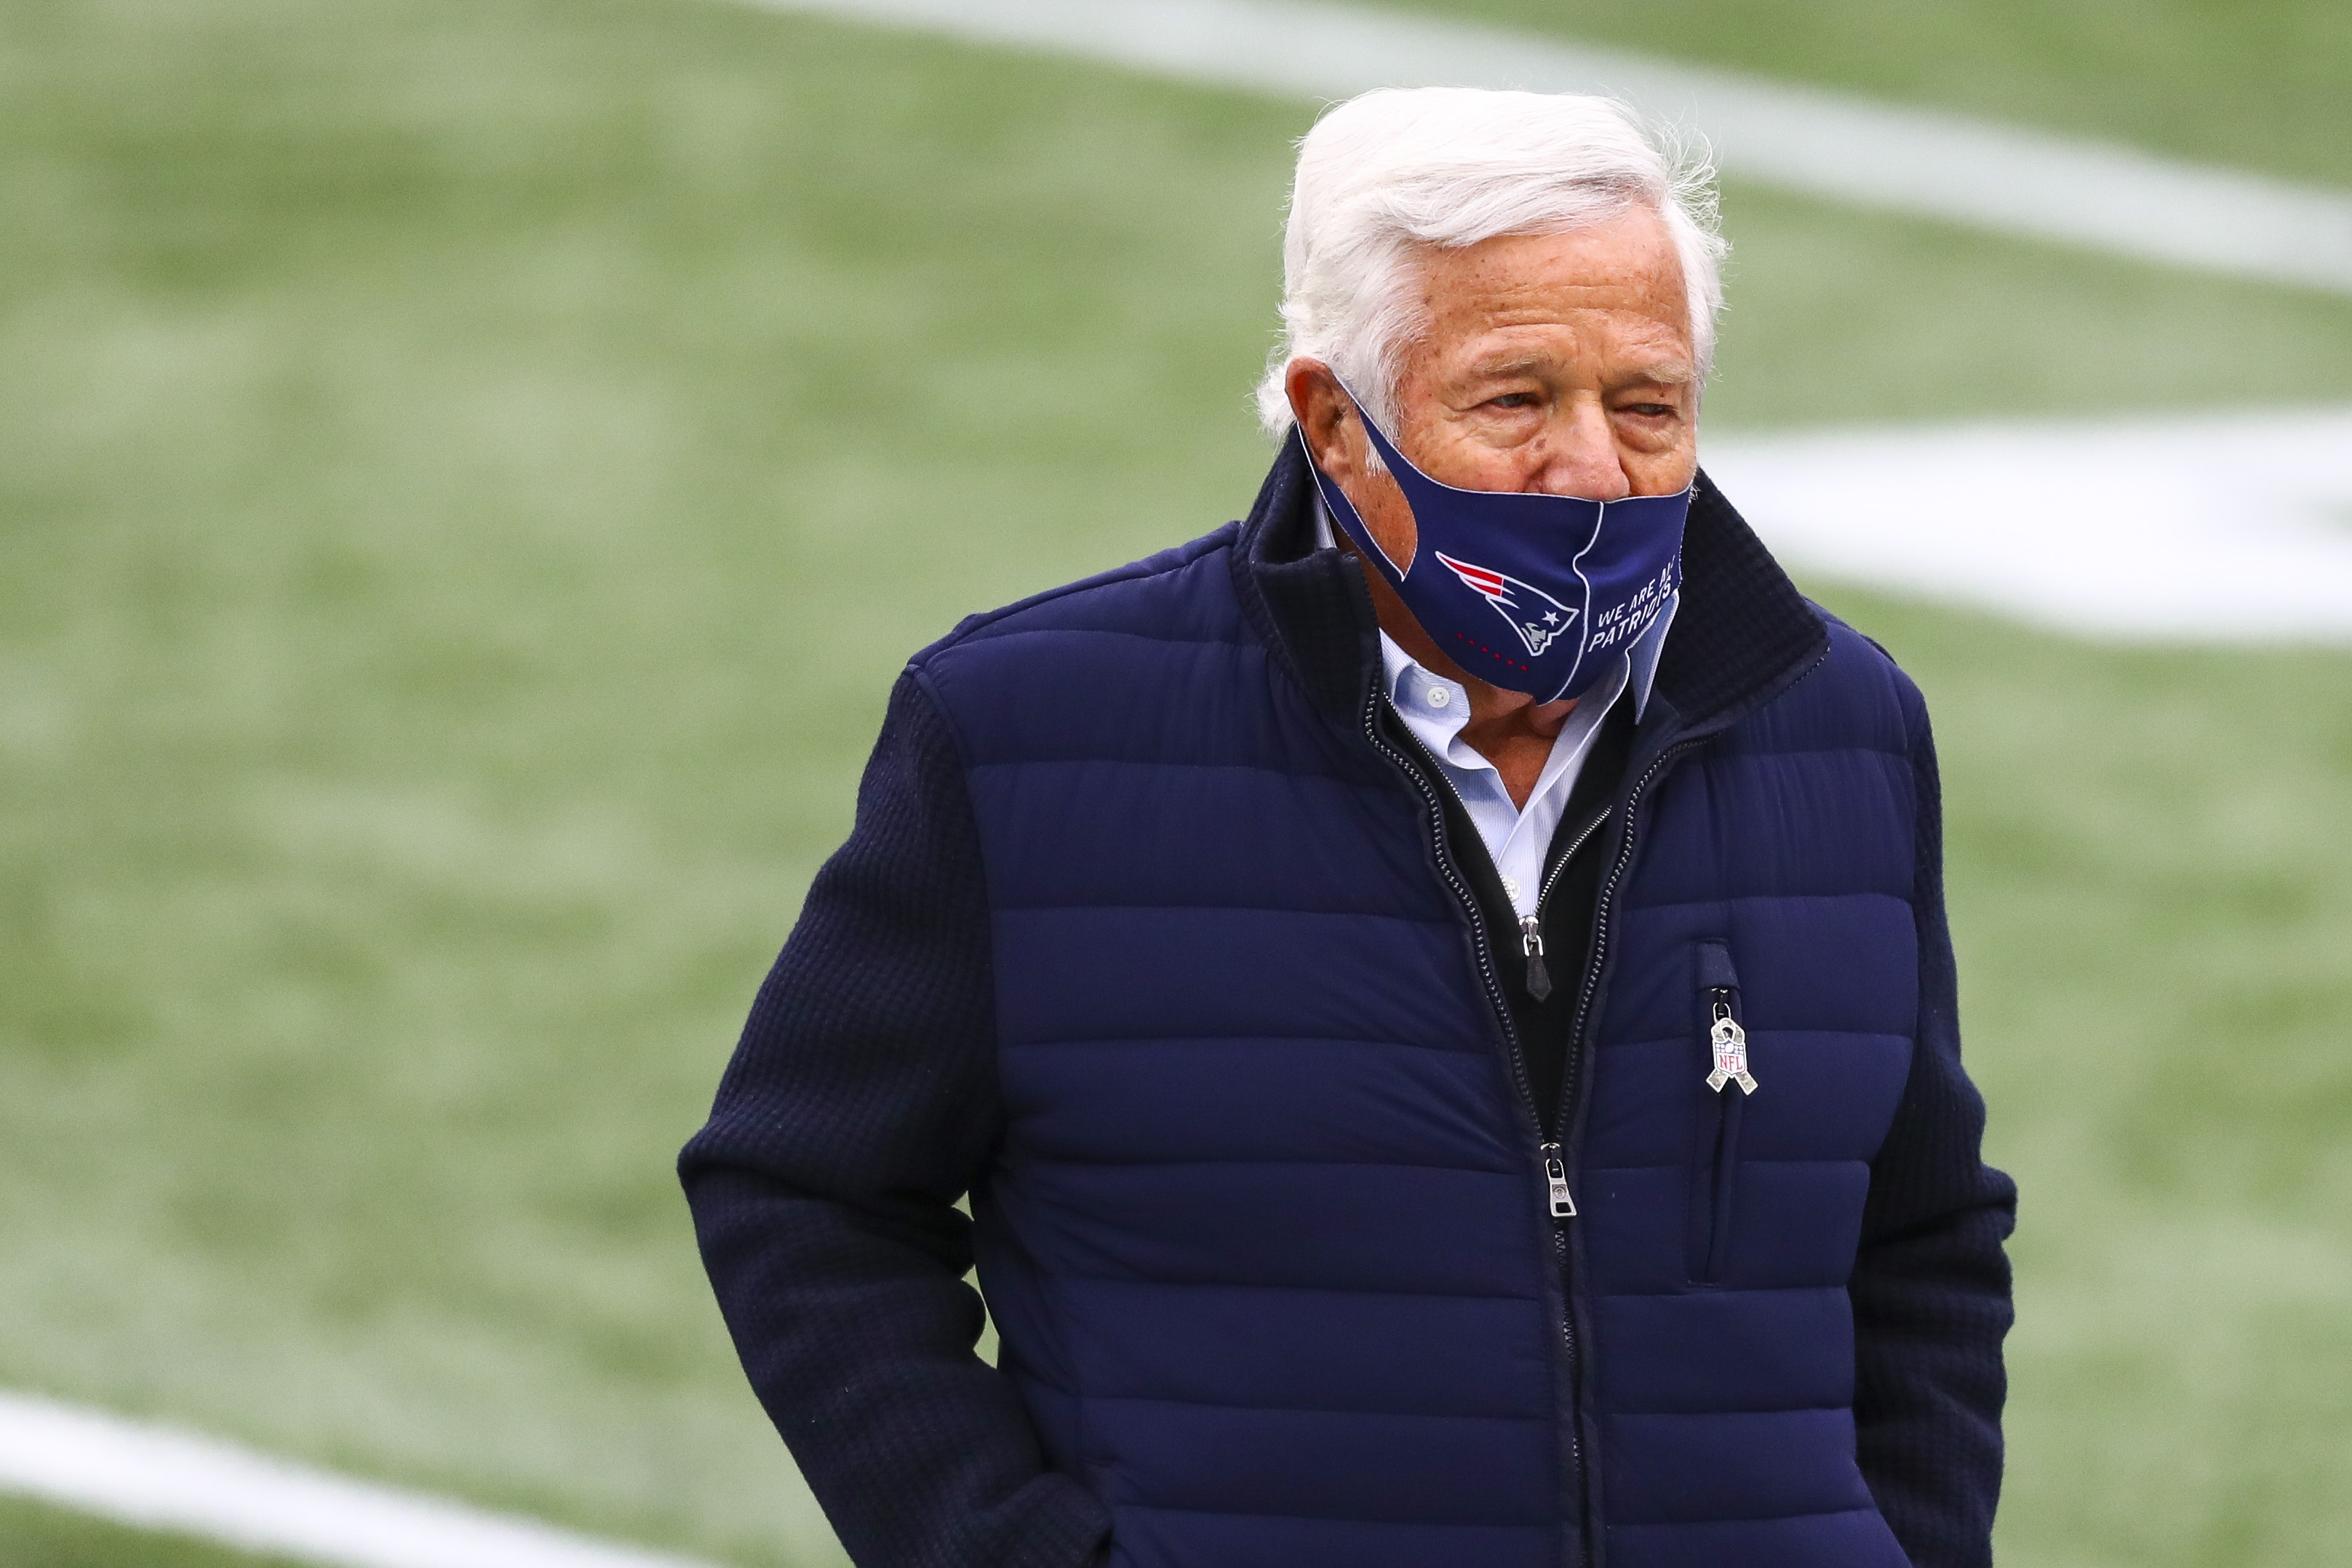 Robert Kraft's recent comments may rile up some Patriots fans.